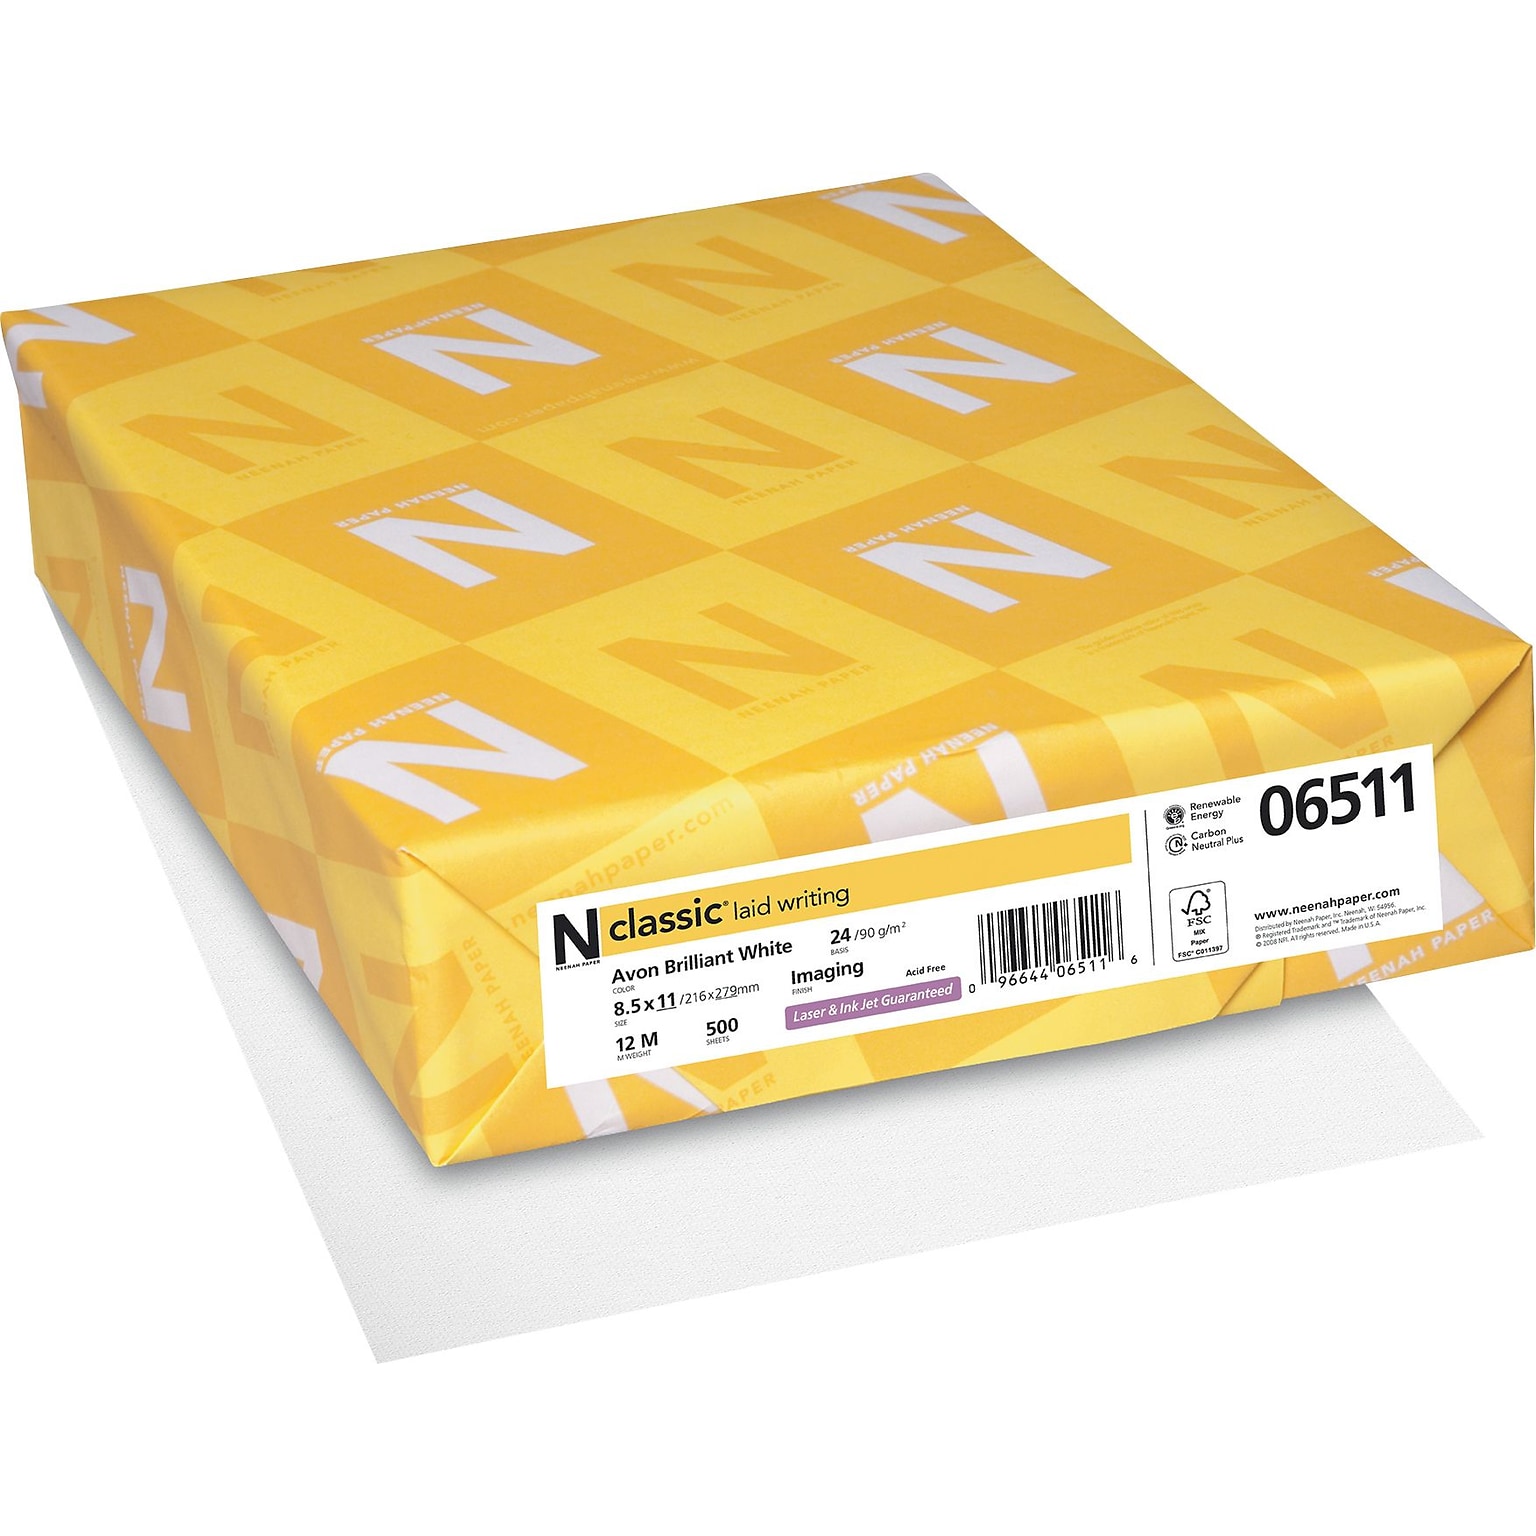 Neenah Paper Classic 8.5 x 11 Business Paper, 24 lbs., Avon Brilliant White with Laid Finish, 500 Sheets/Ream (06511)